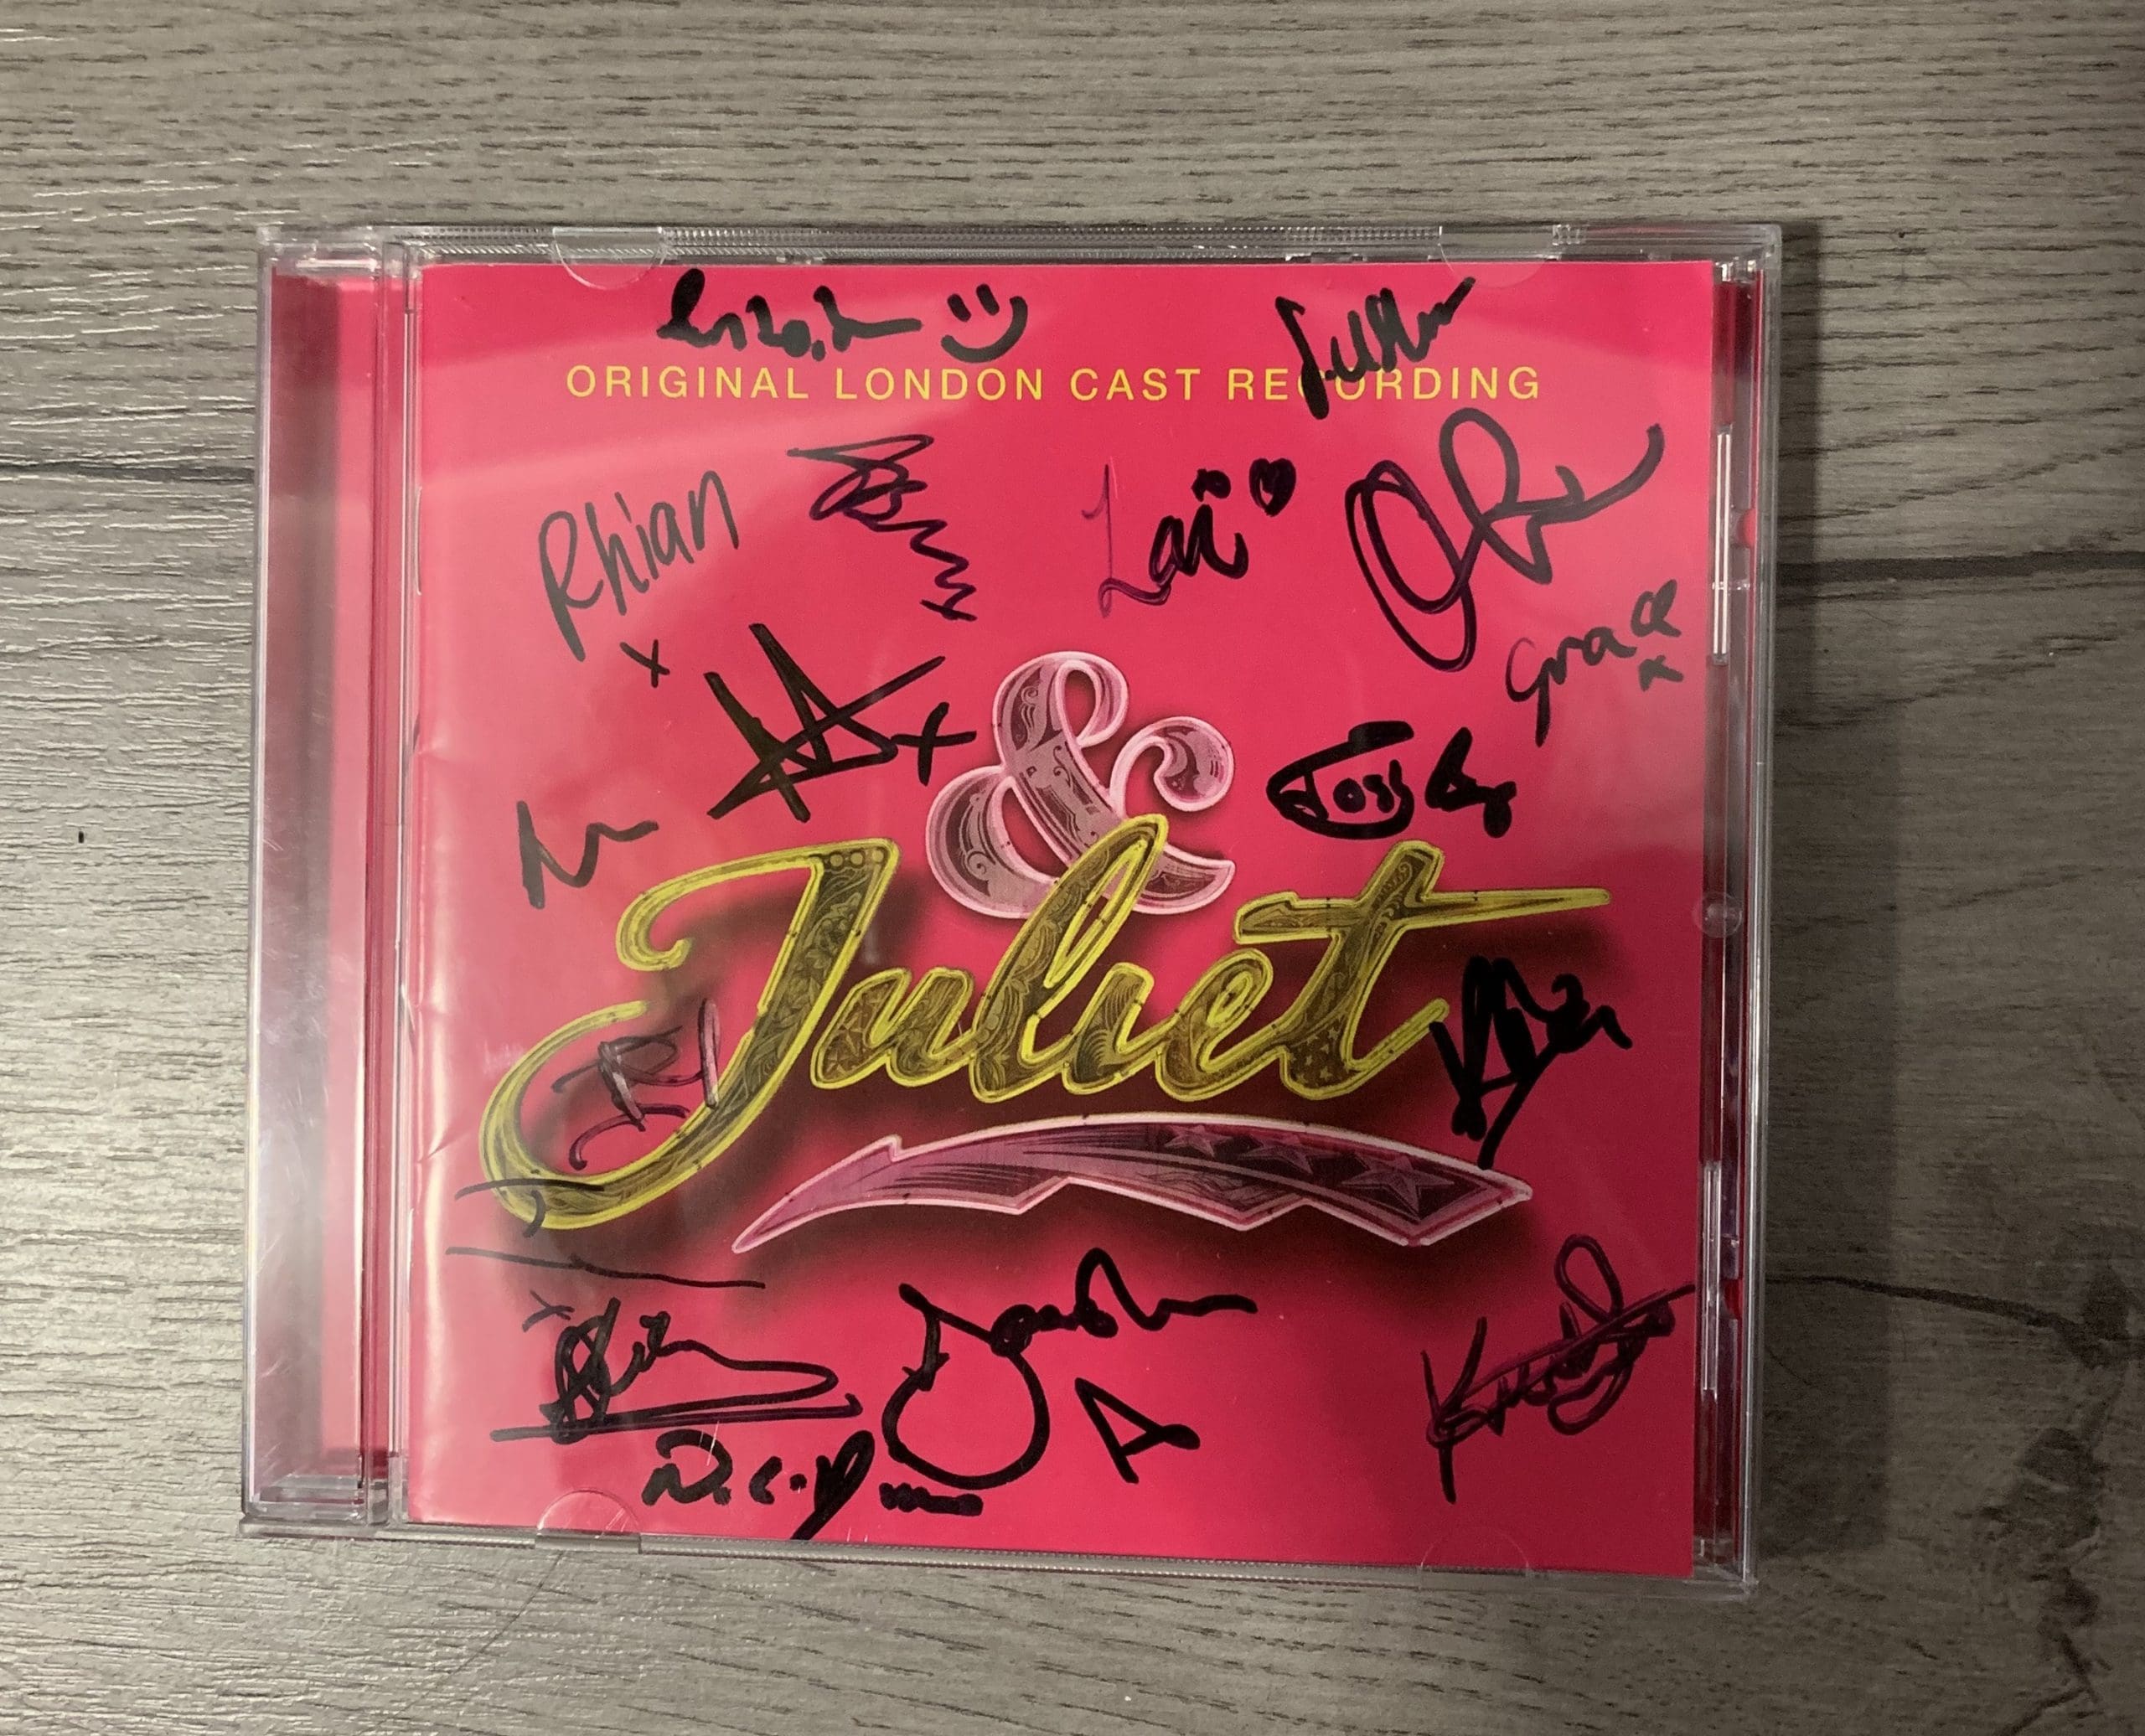 Enter our competition for a chance to win an & Juliet CD signed by the cast